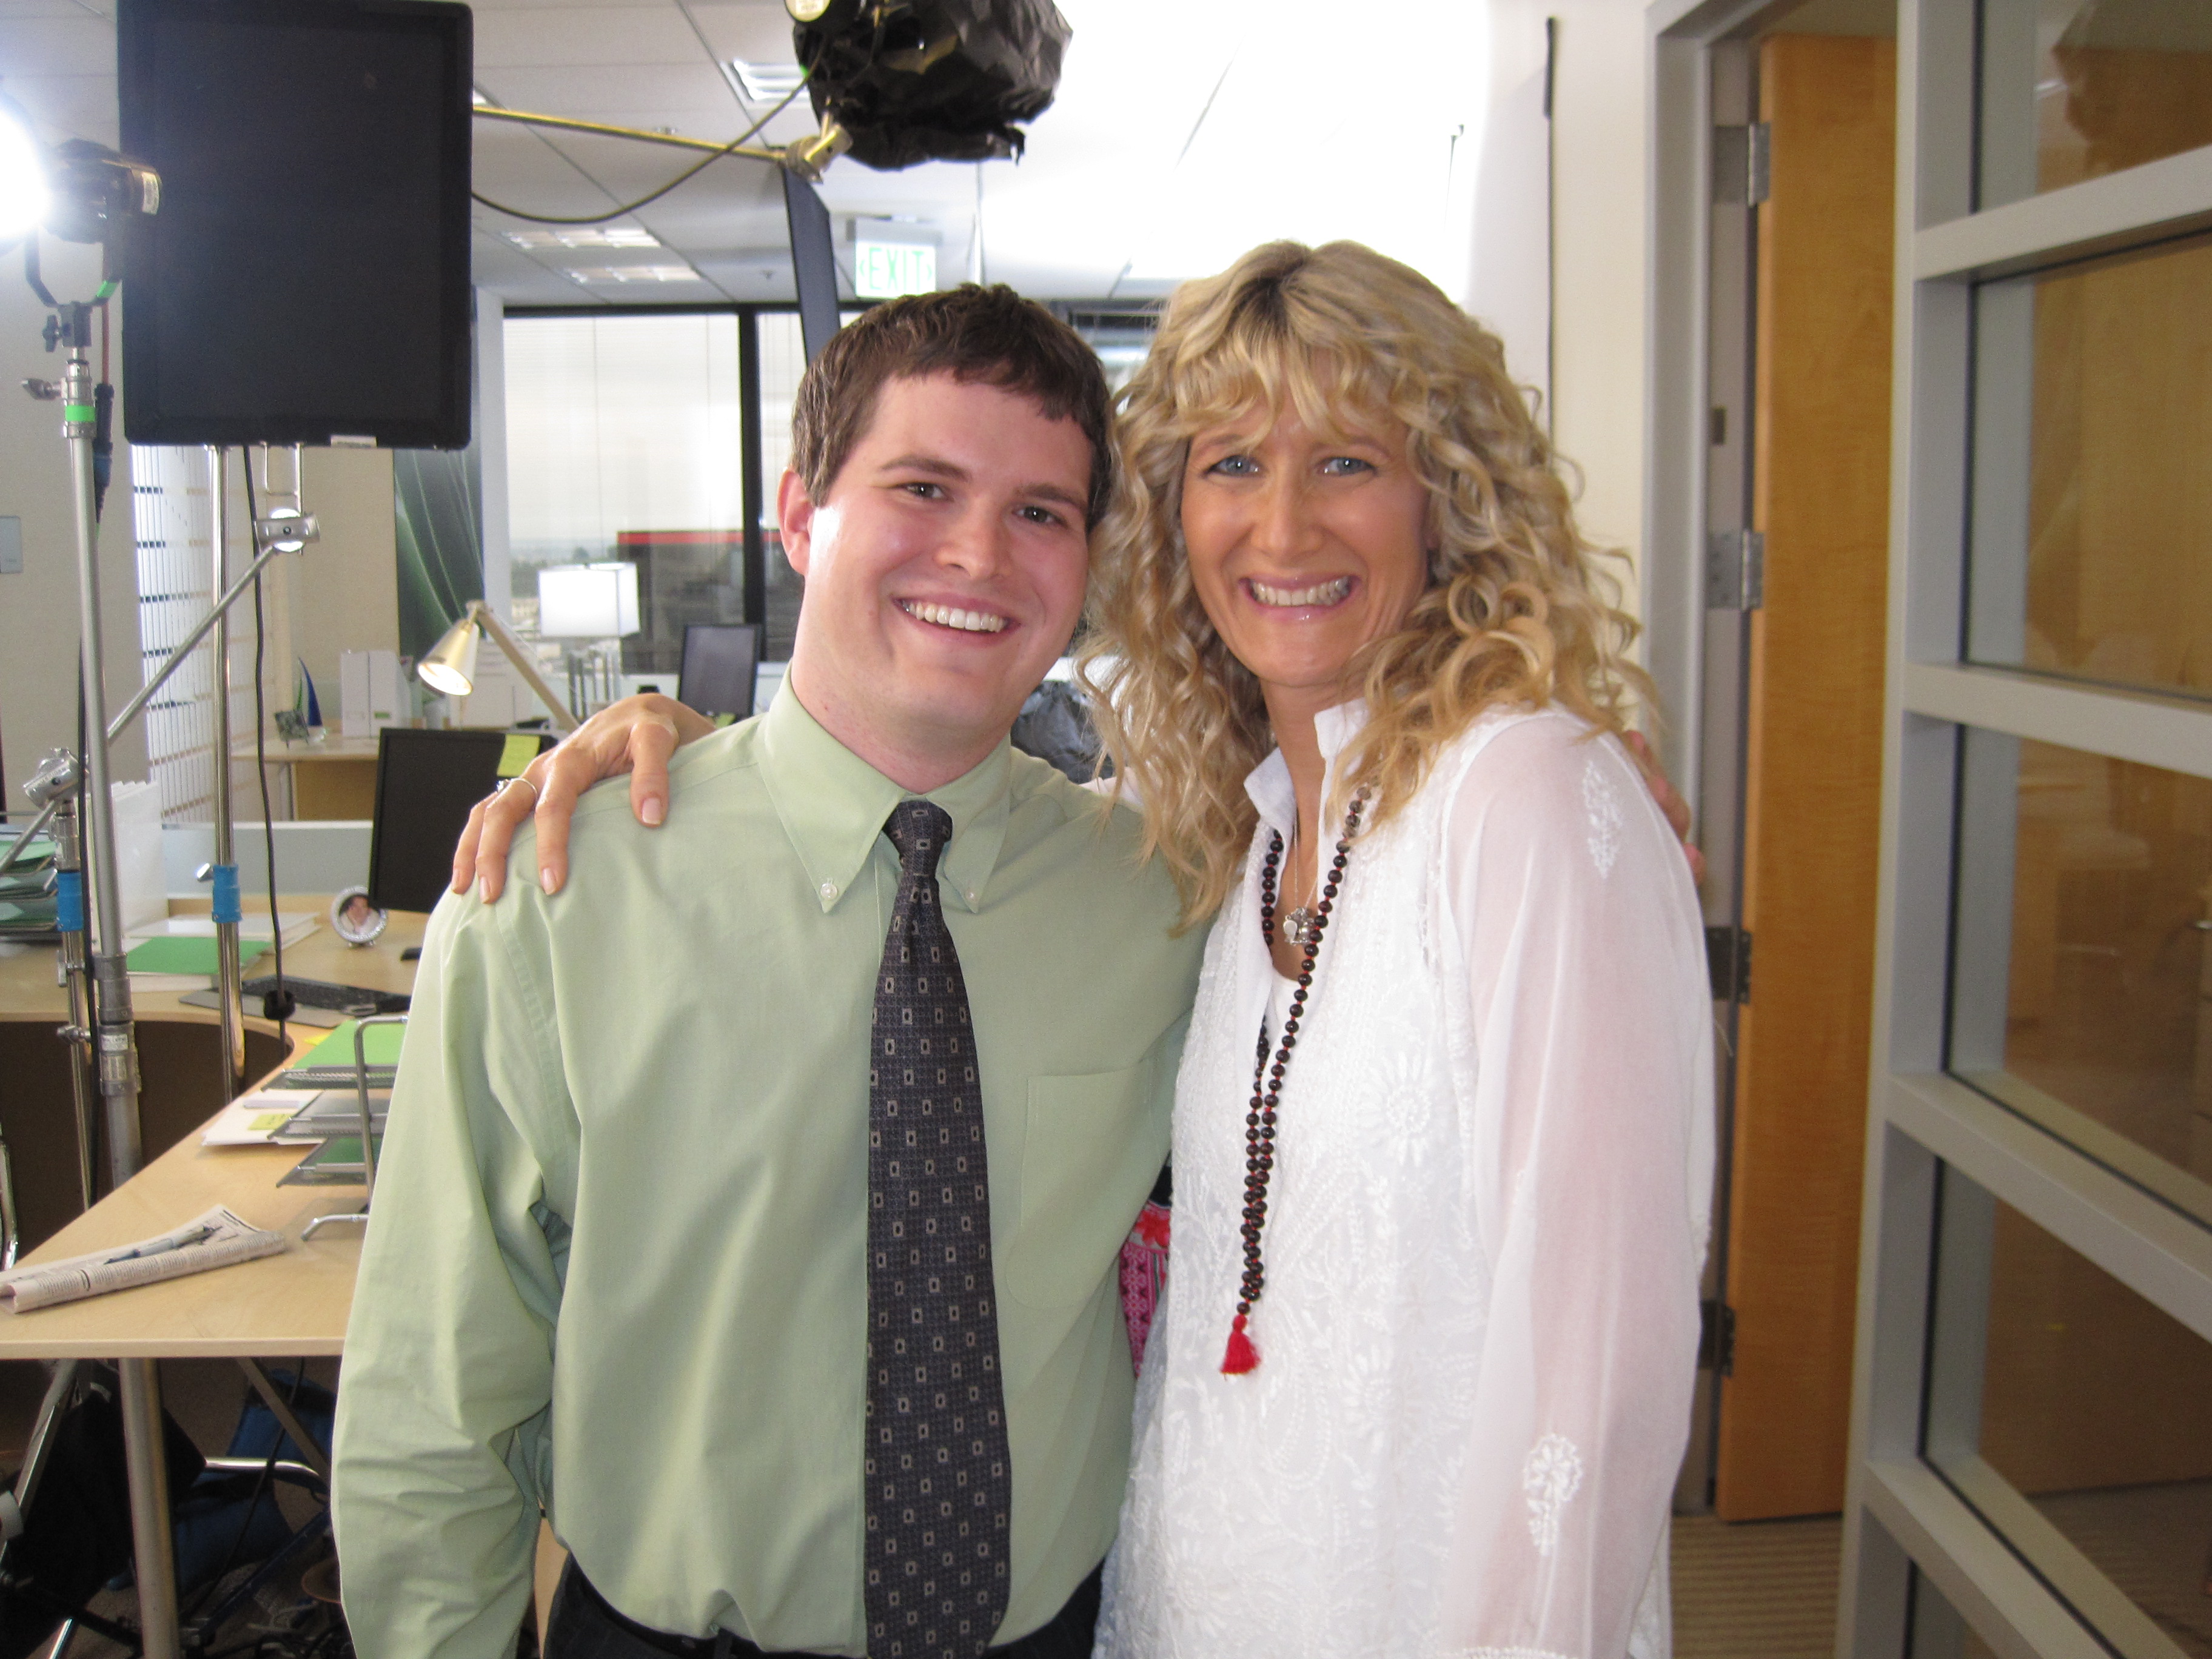 Erich as 'Kevin' with Laura Dern as 'Amy'on the set of HBO's 